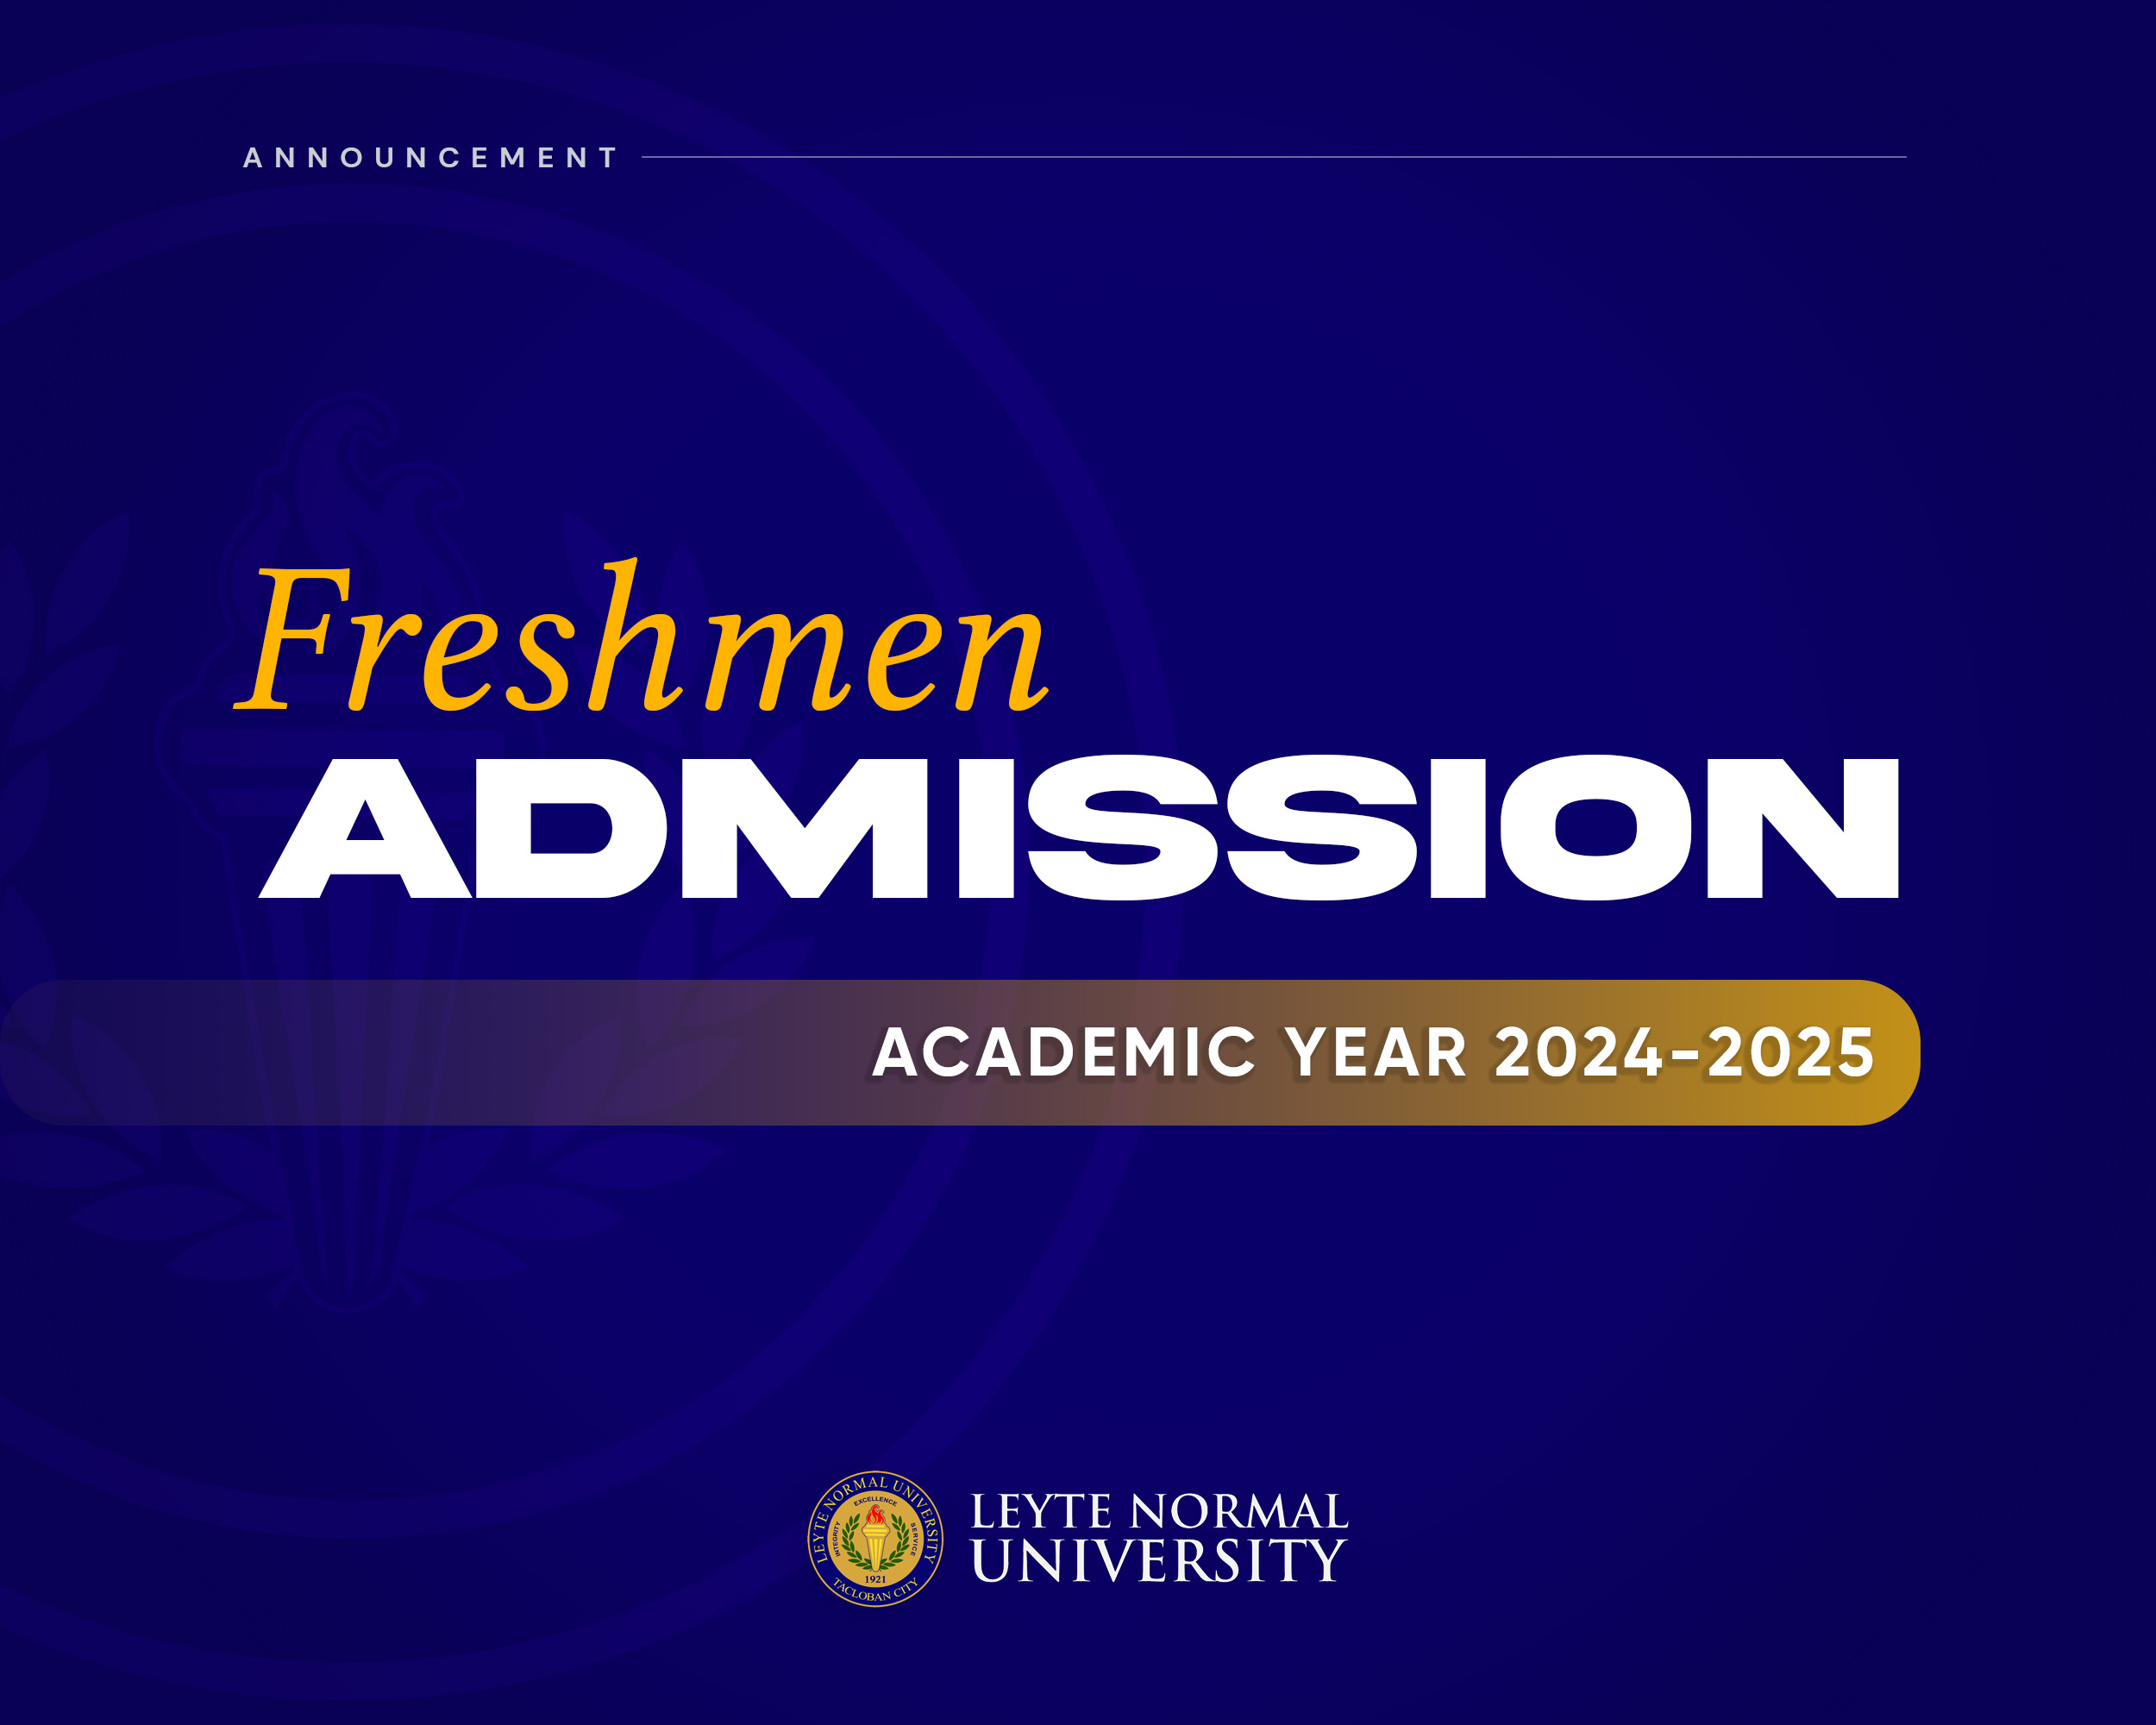 LNU Opens Freshmen Admission for A.Y. 2024-2025 | Leyte Normal University